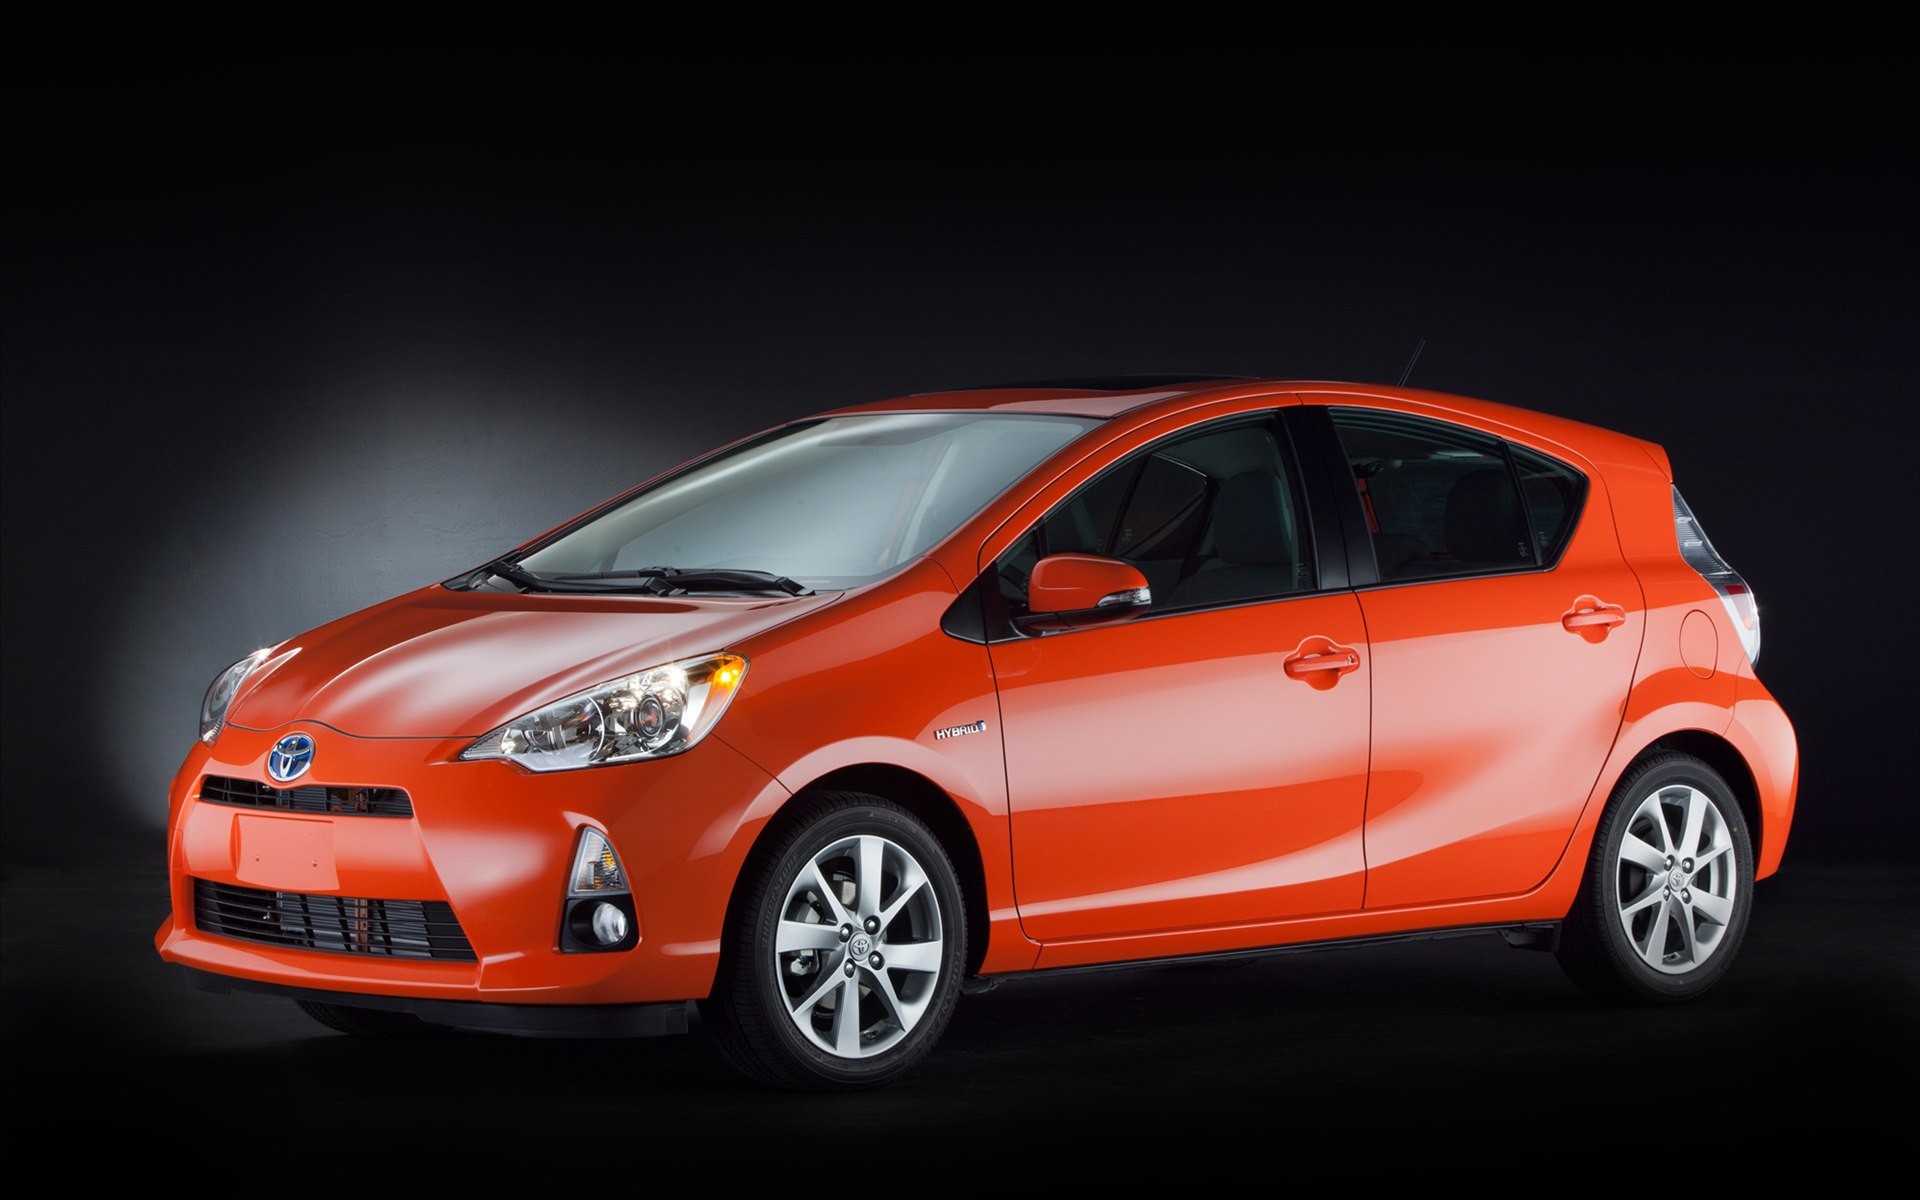 cars, Orange, Toyota Wallpapers HD / Desktop and Mobile Backgrounds